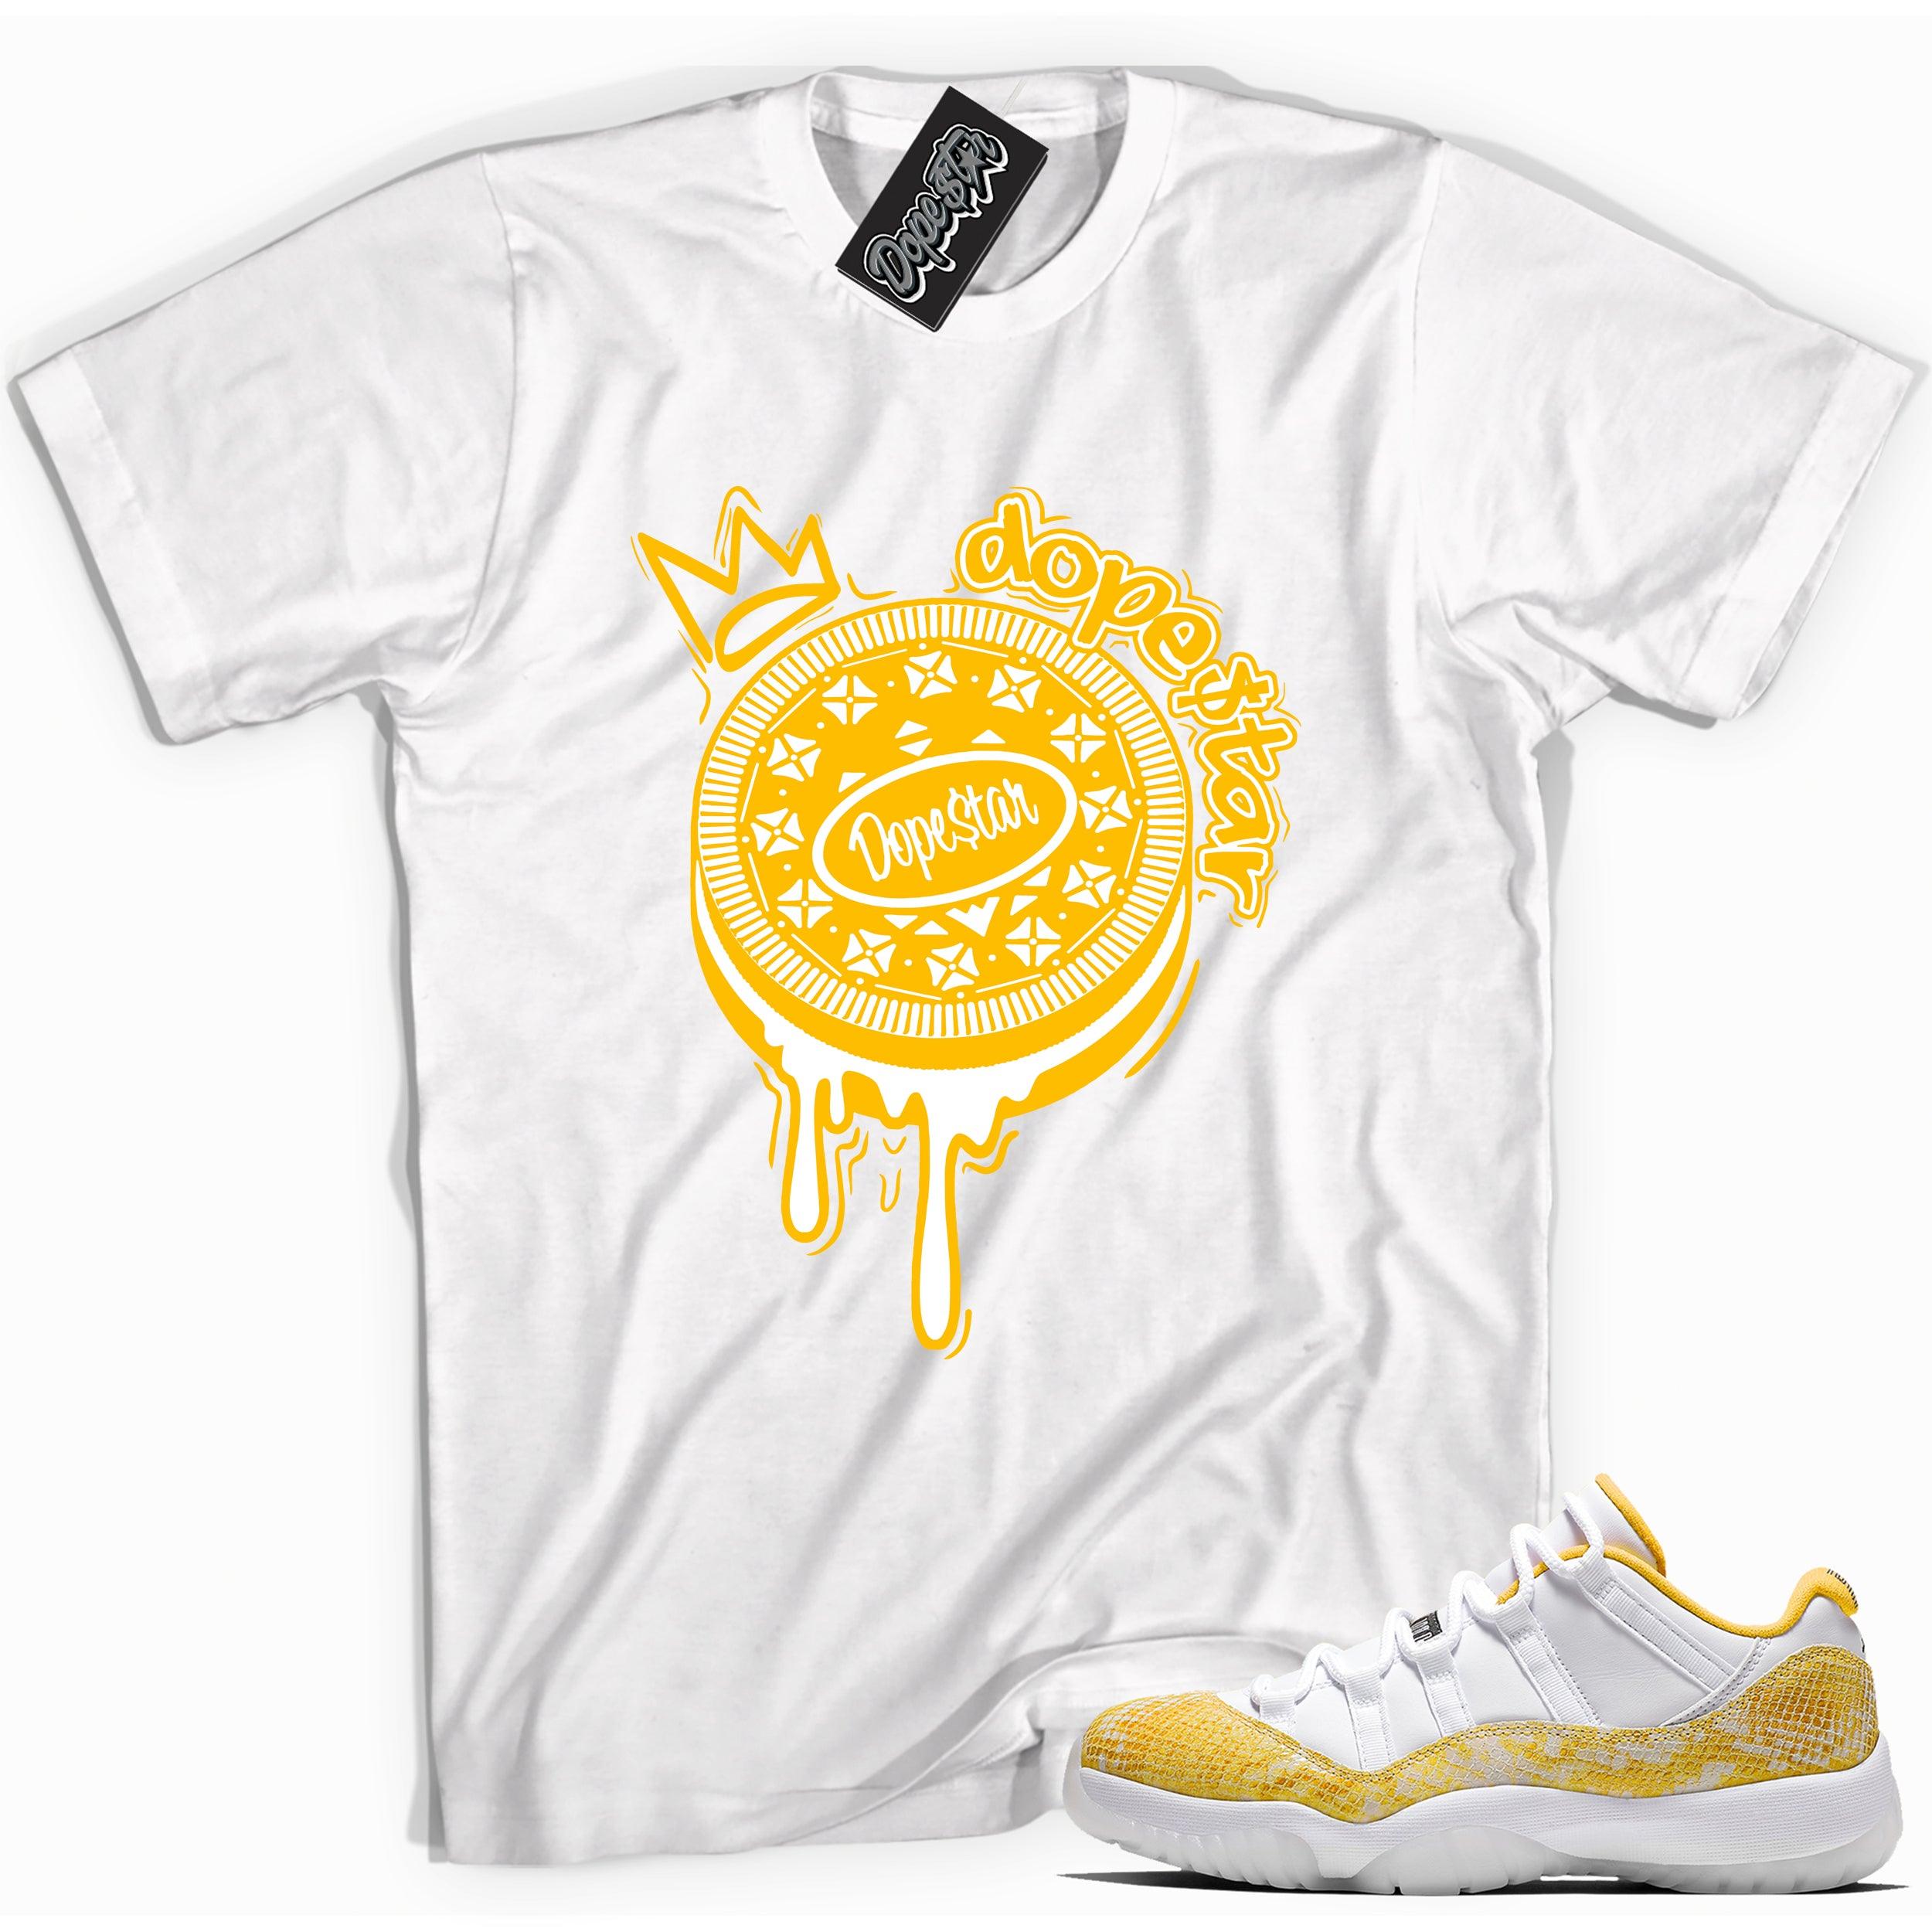 Cool white graphic tee with 'oreo dopestar' print, that perfectly matches Air Jordan 11 Retro Low Yellow Snakeskin sneakers